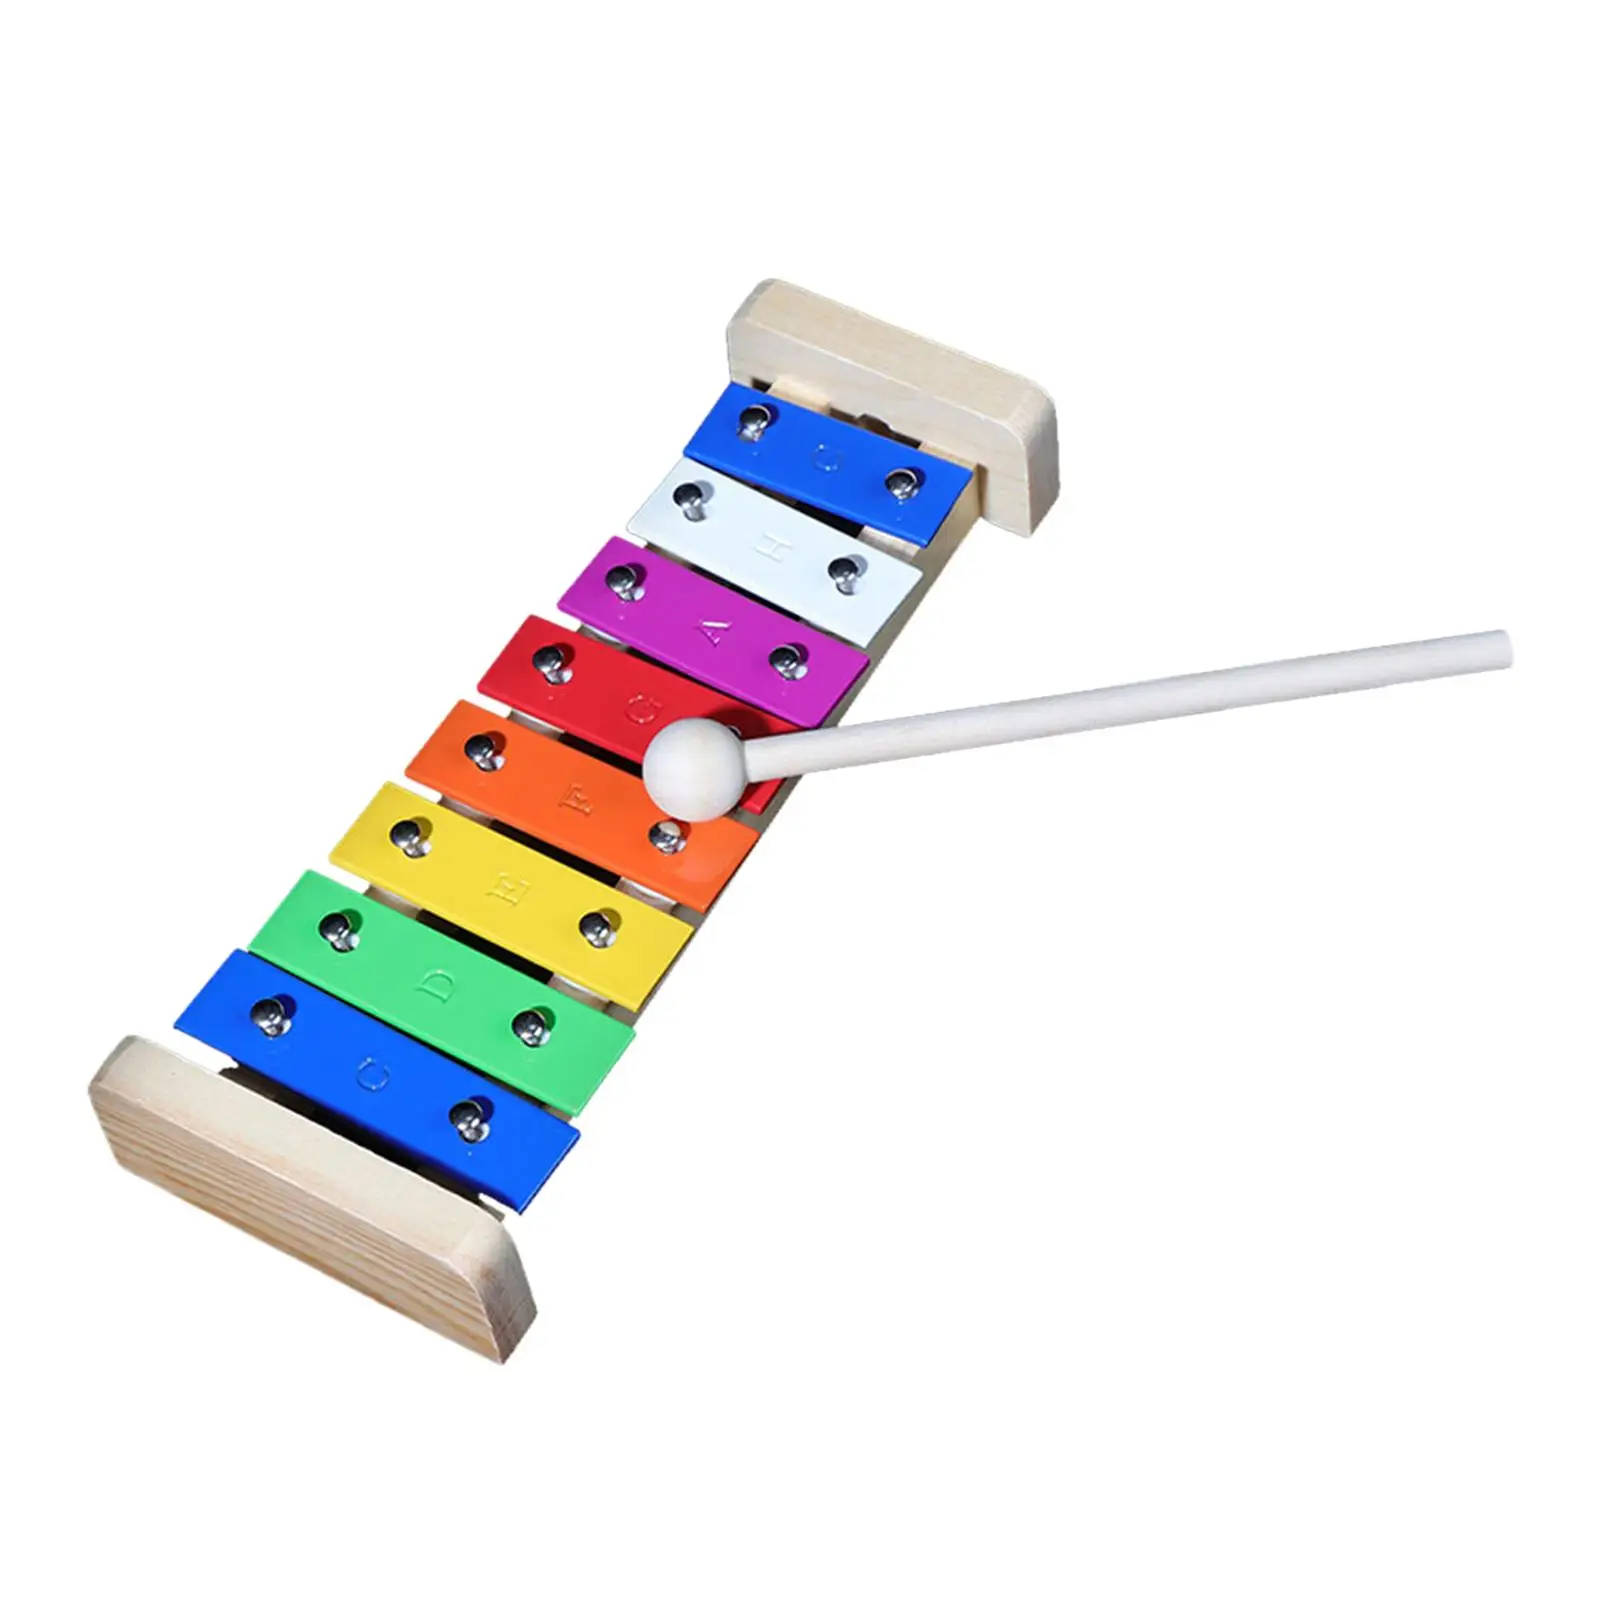 8 Note Glockenspiel Musical Toy for Kids and Adult Beginner Birthday Gift